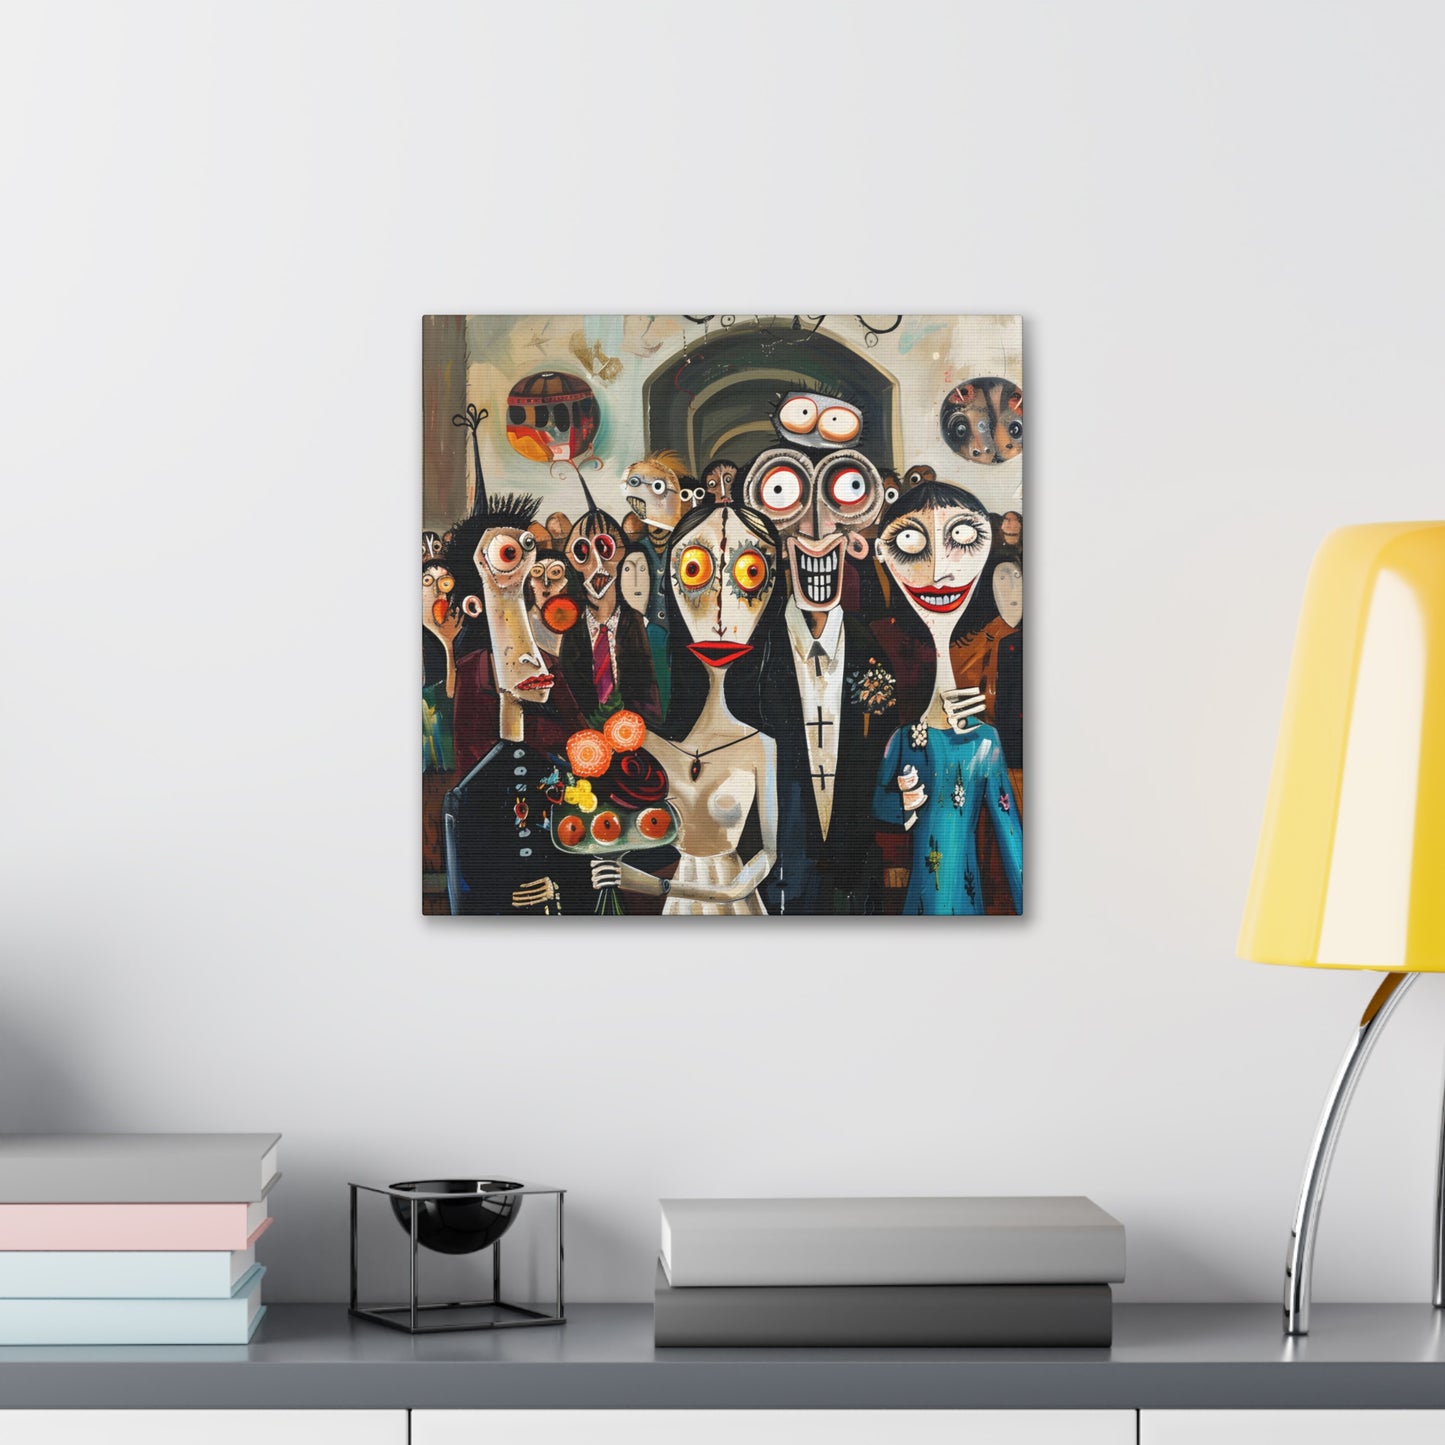 insitu with desk Whimsical wedding scene with caricatured bride and groom, surrounded by guests with exaggerated, comical expressions, set against a backdrop of abstract and surreal elements